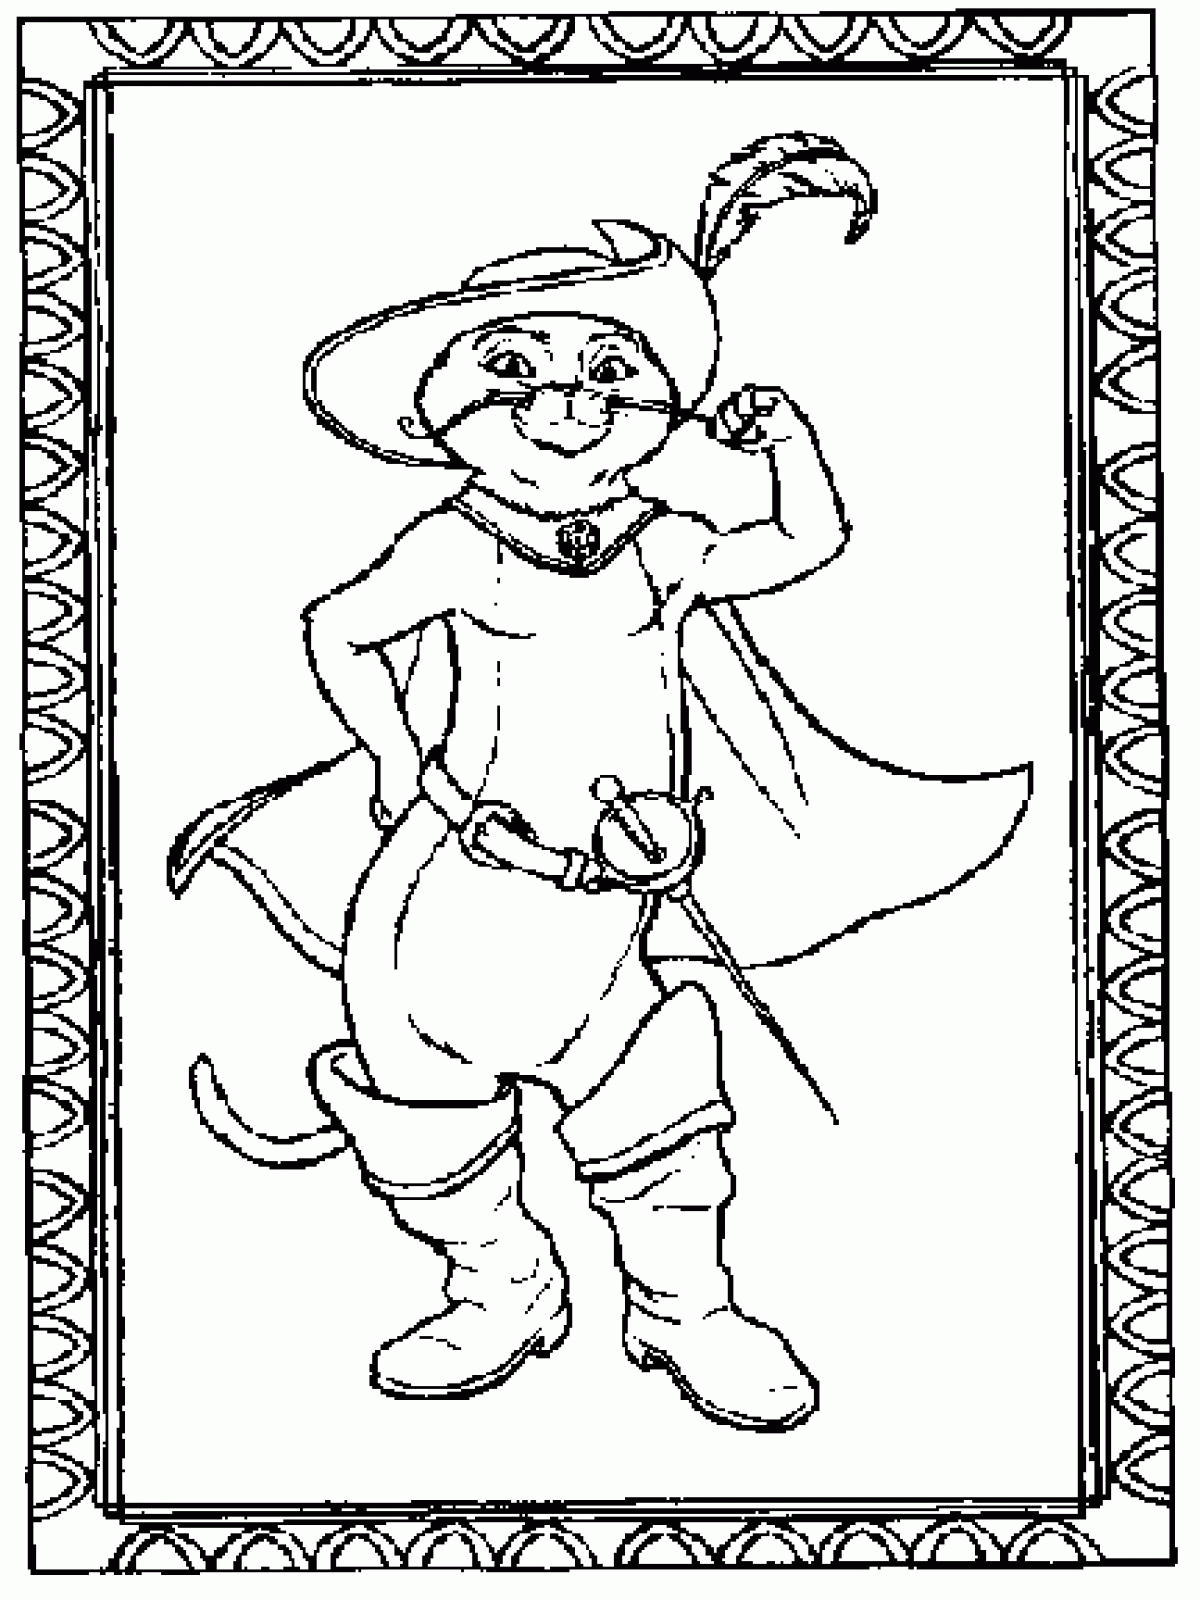 Baby Puss In Boots Coloring Pages Printable - Coloring Pages For ...